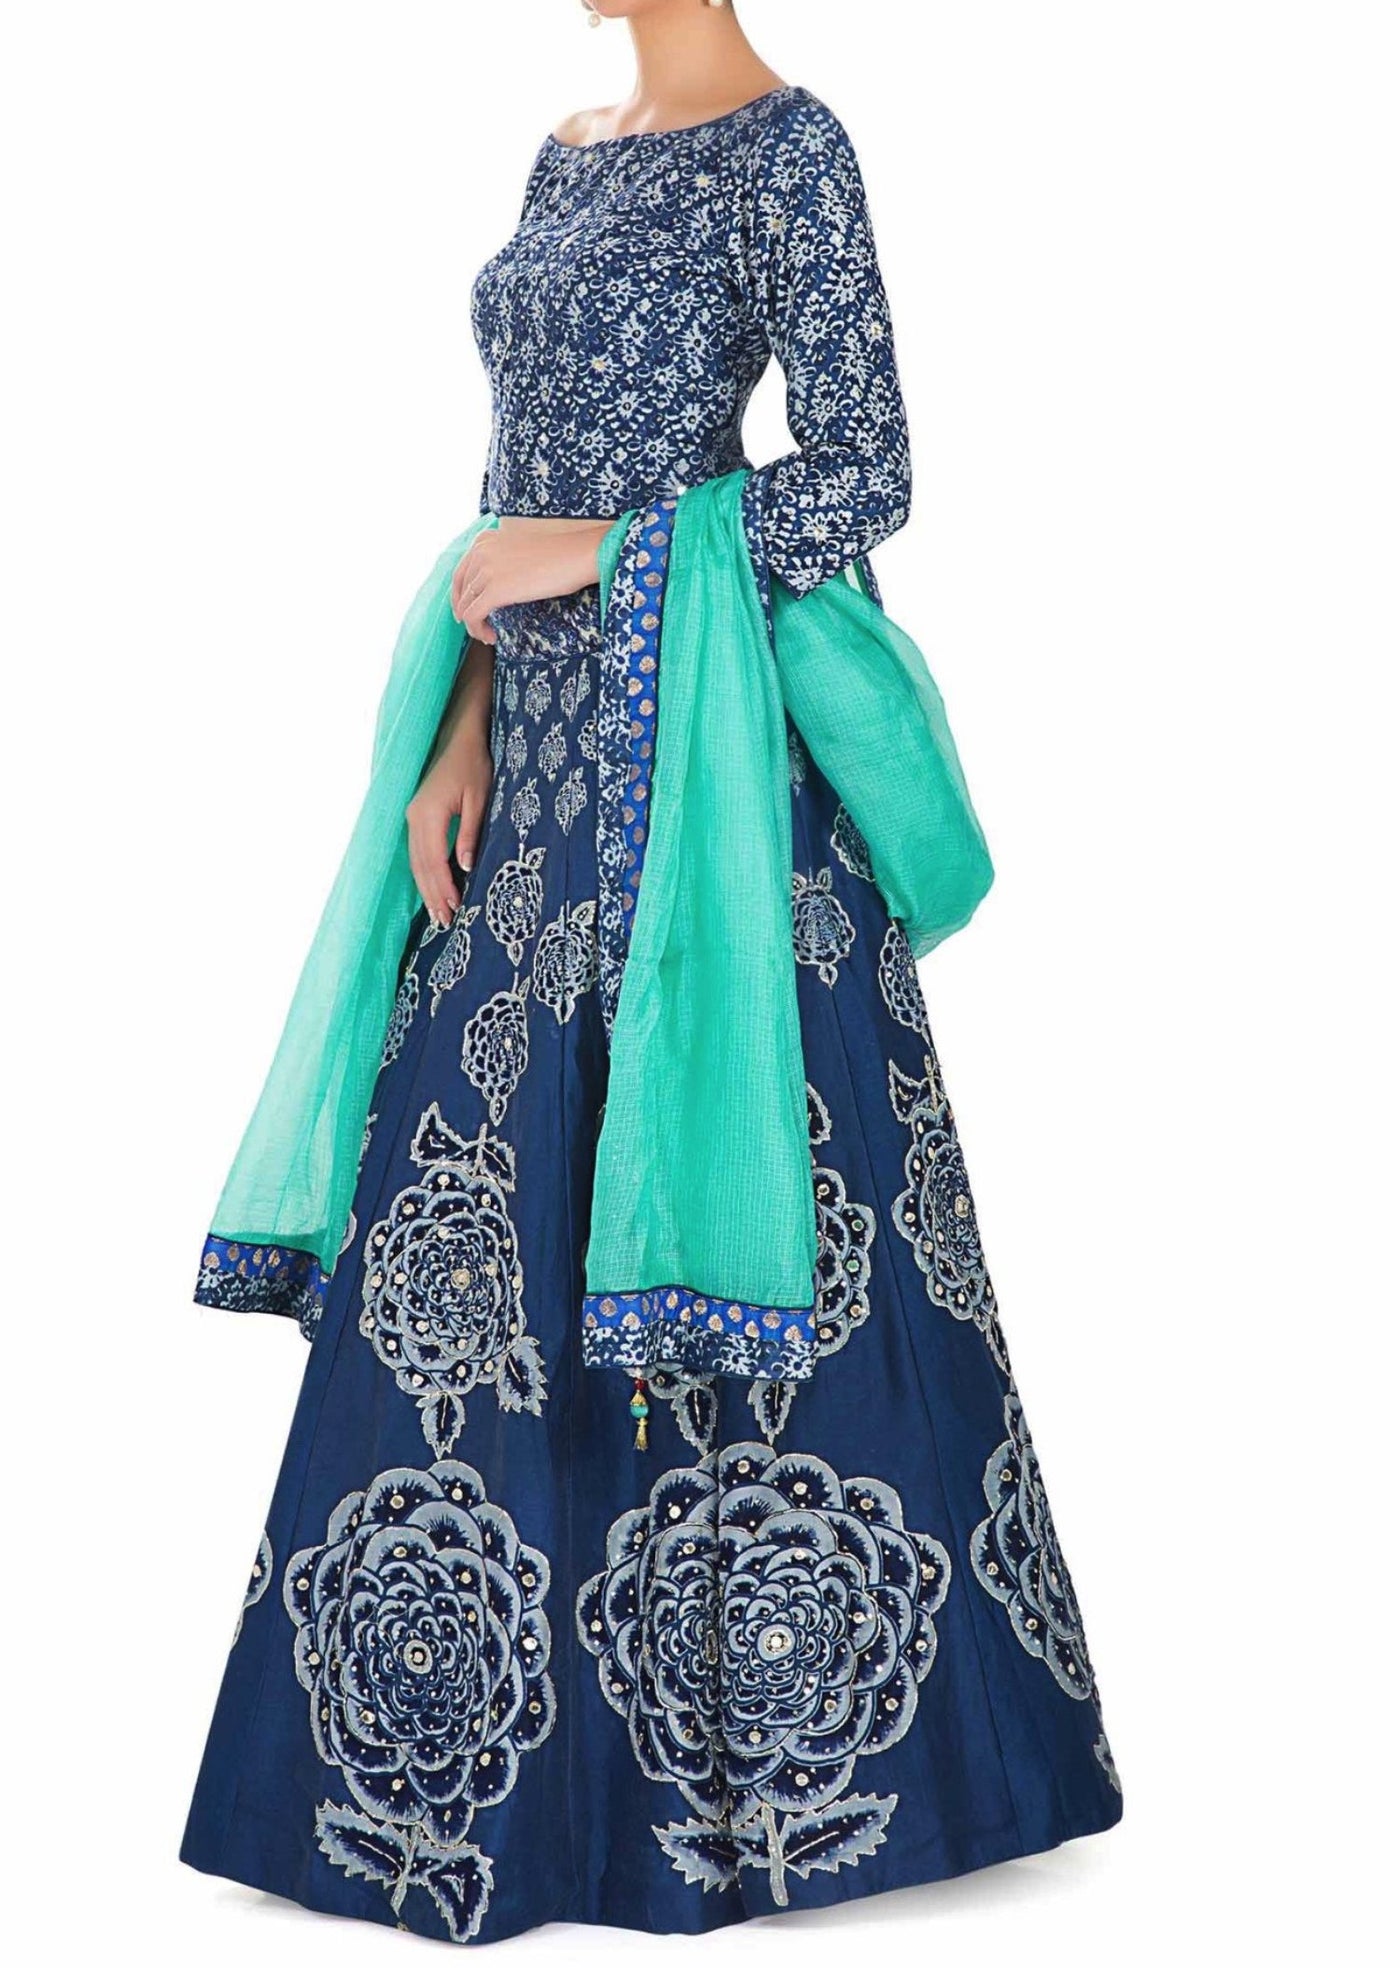 Printed Blue Cotton Top and Lehenga with Sequins and Silk Net Dupatta Indian Clothing in Denver, CO, Aurora, CO, Boulder, CO, Fort Collins, CO, Colorado Springs, CO, Parker, CO, Highlands Ranch, CO, Cherry Creek, CO, Centennial, CO, and Longmont, CO. NATIONWIDE SHIPPING USA- India Fashion X